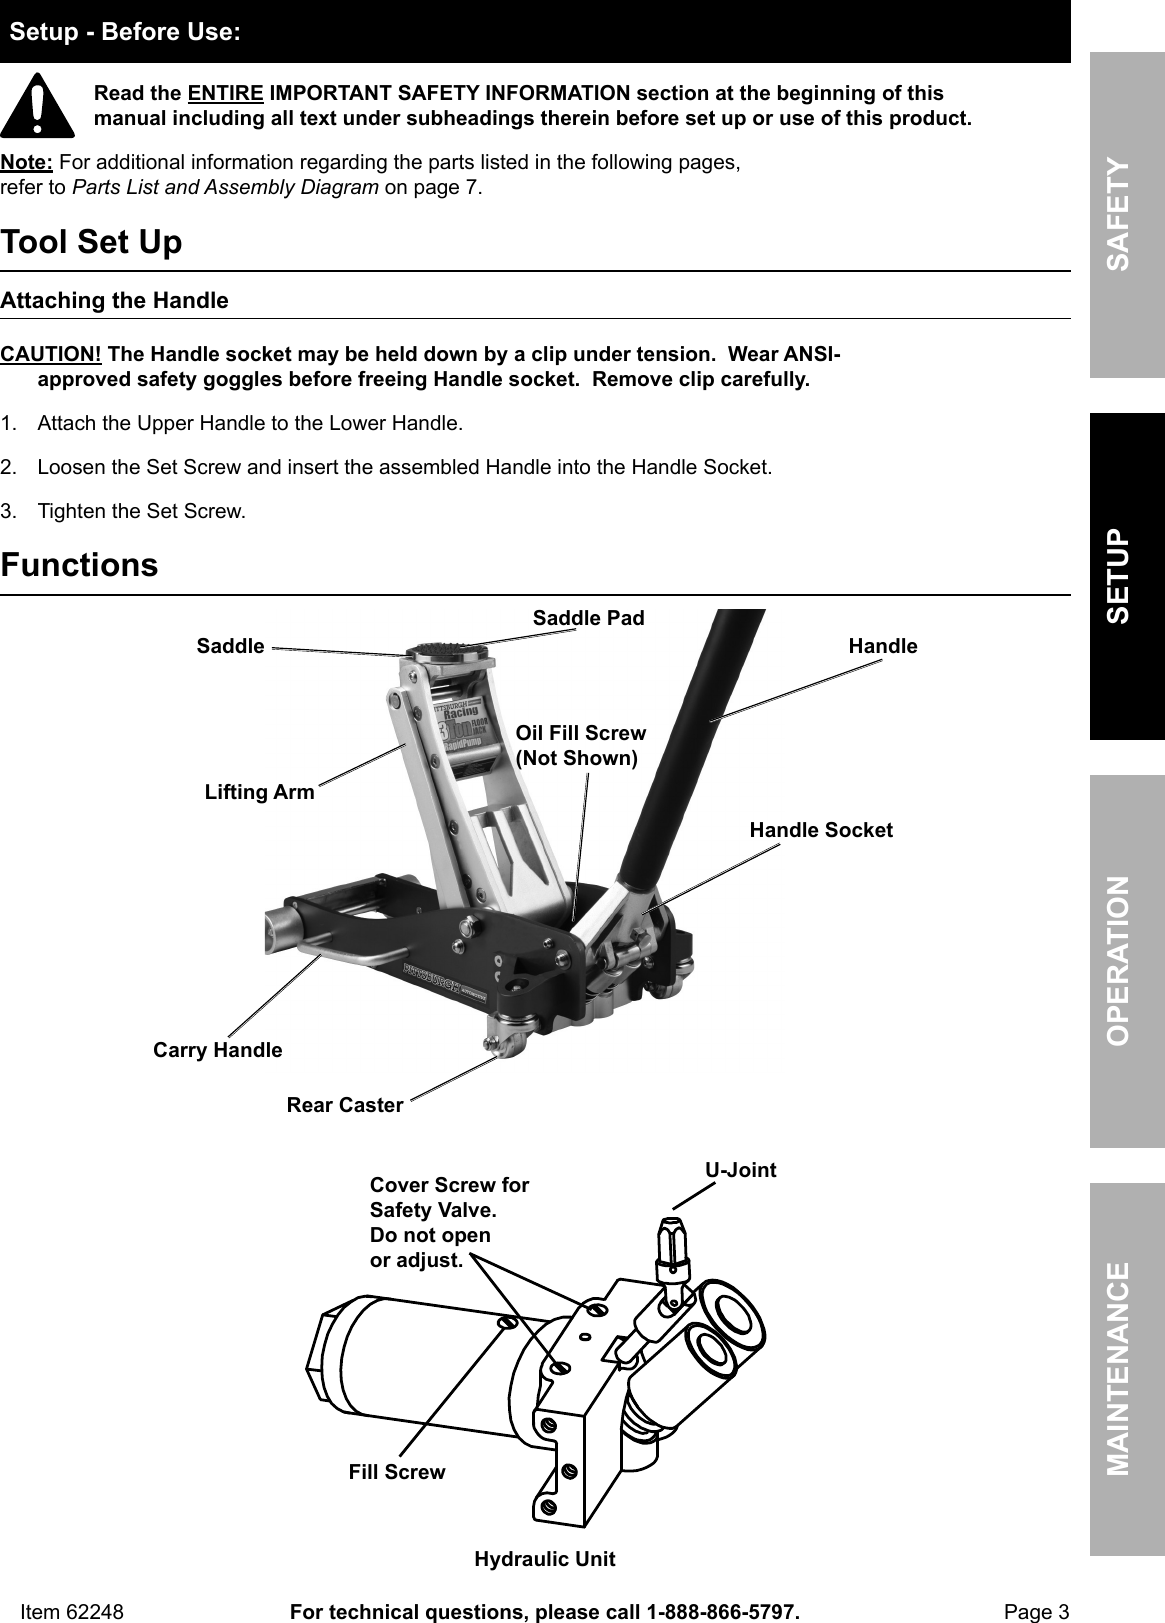 Manual For The 62248 3 Ton Aluminum Racing Floor Jack With Rapid Pump